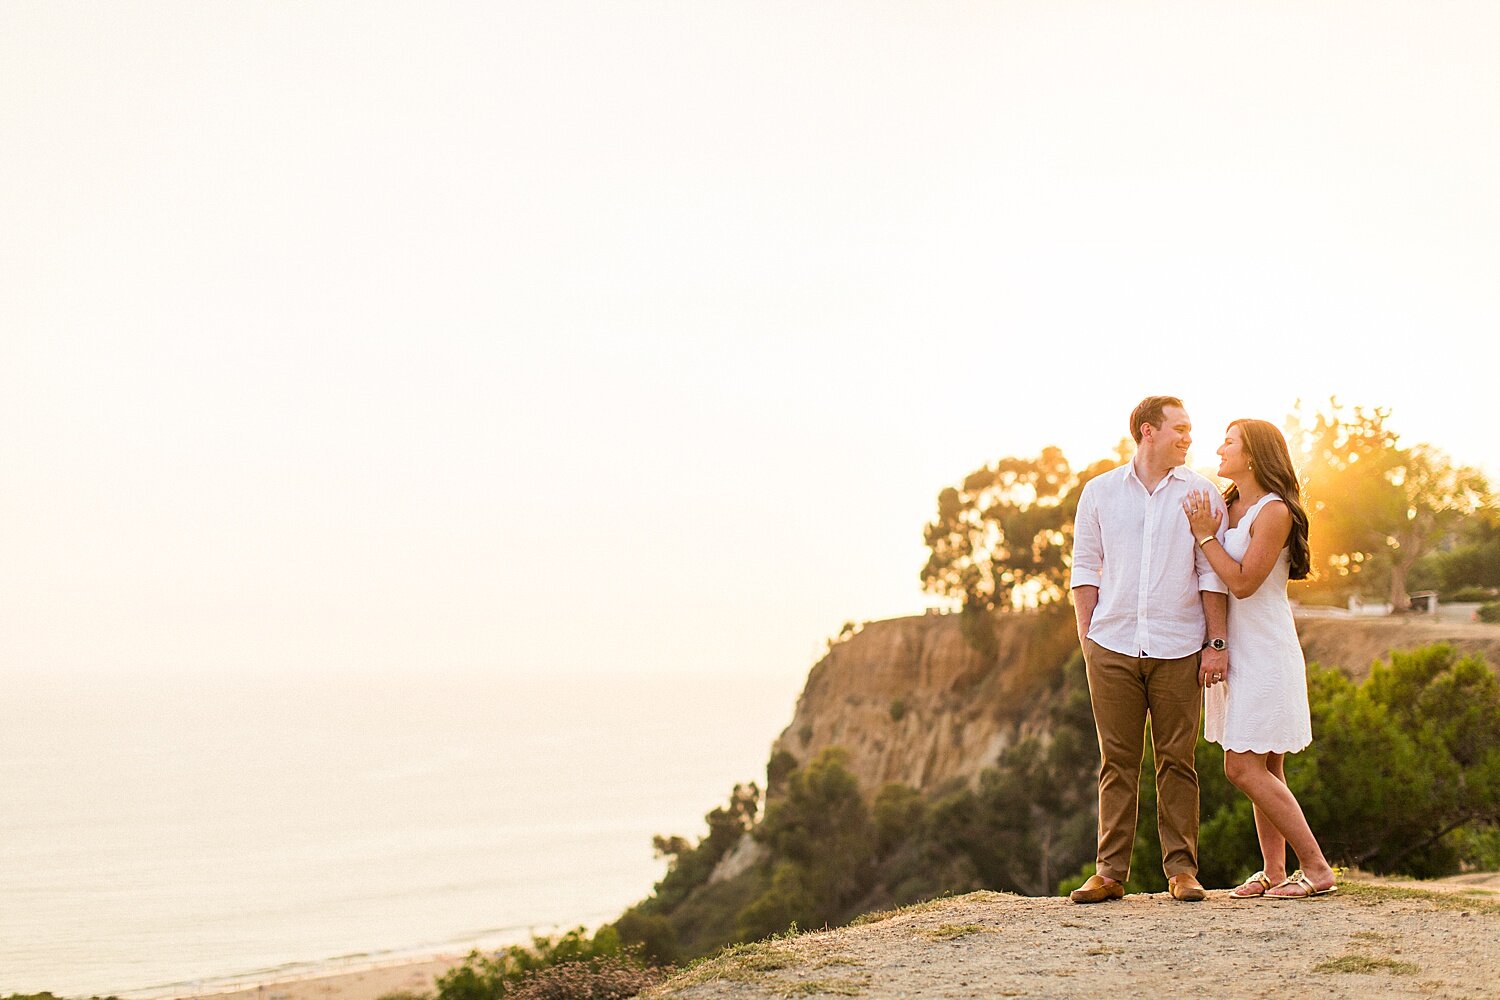 couple shares a special moment after their wedding in santa monica | los angeles wedding photographer | thevondys.com